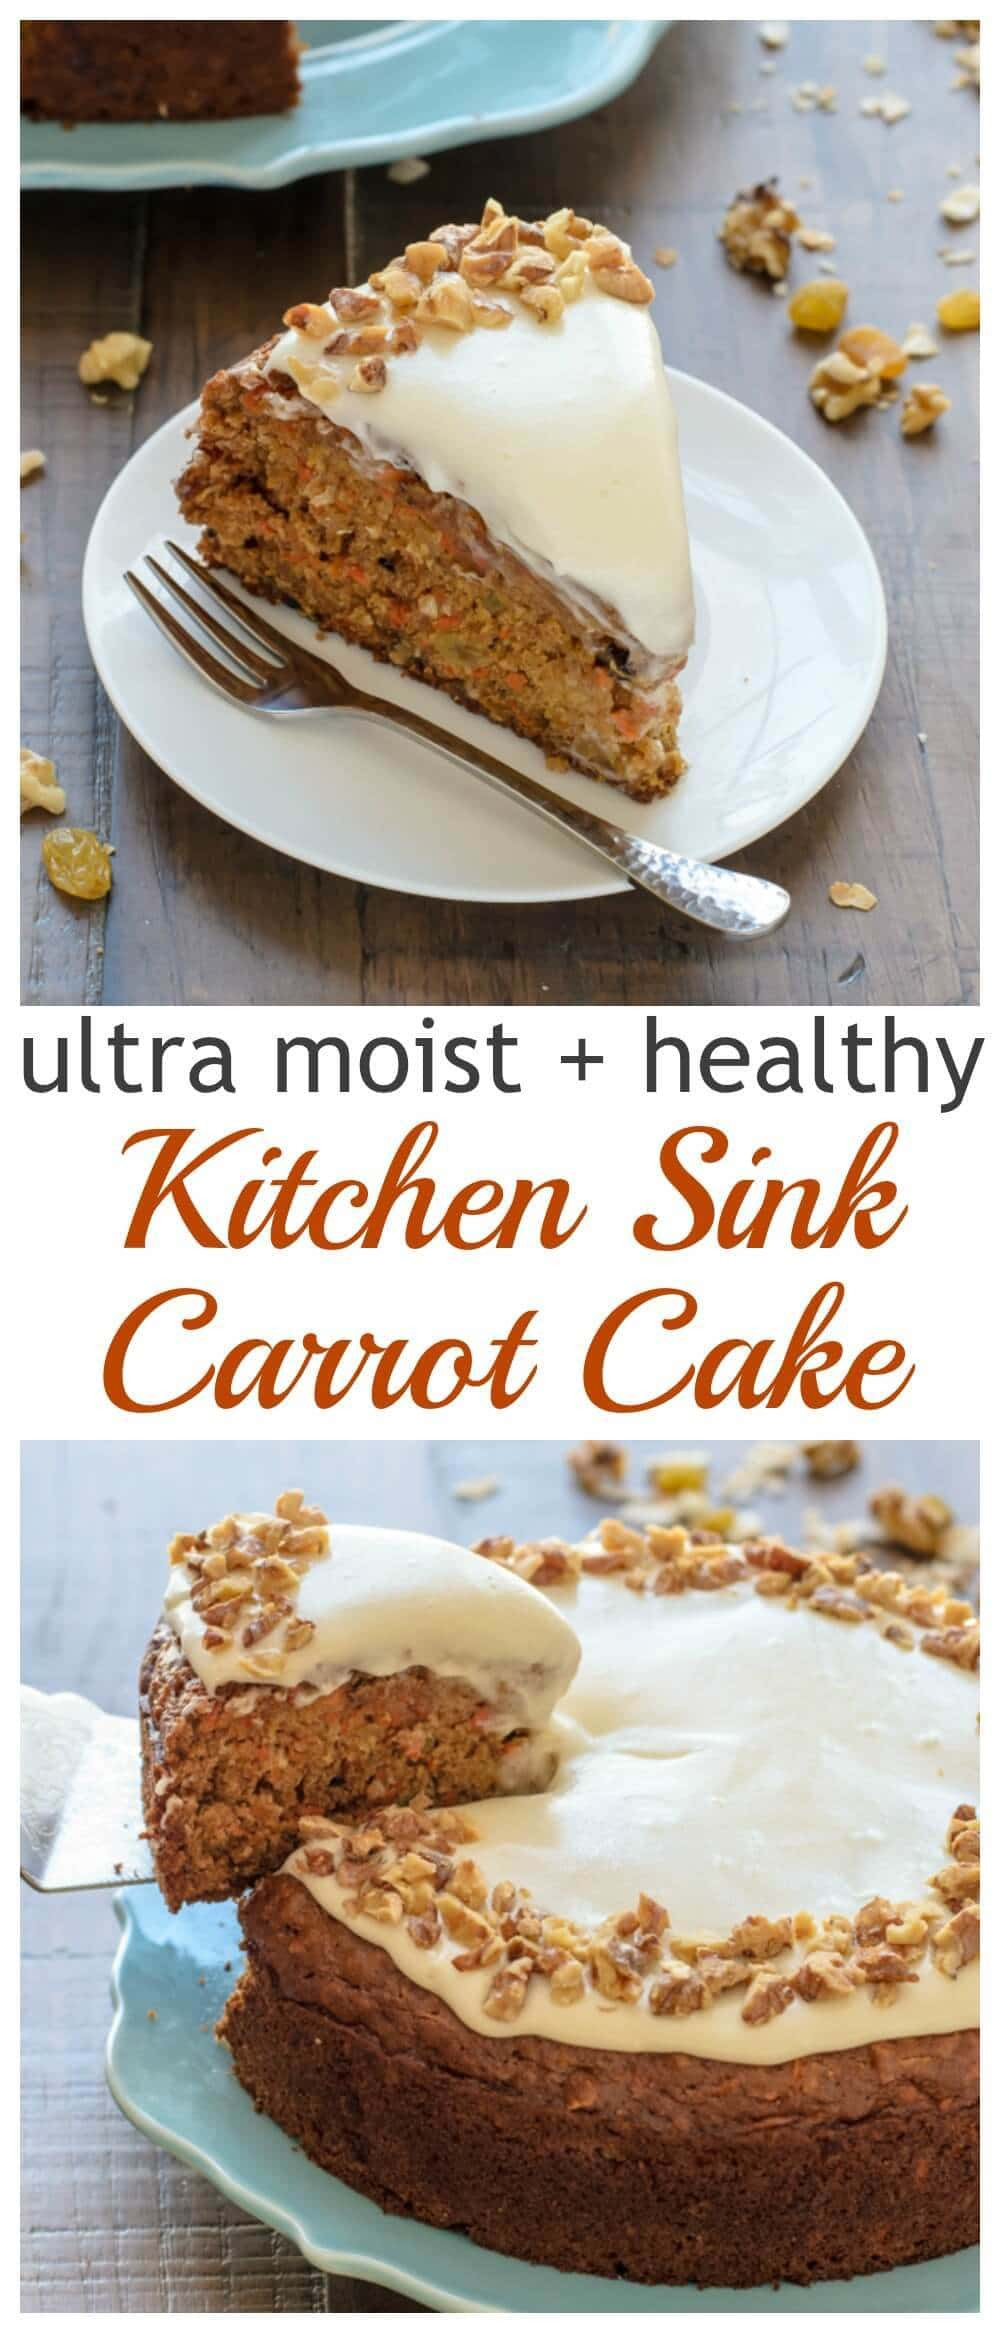 Healthy Cake Recipe
 Healthy Carrot Cake with Light Cream Cheese Frosting